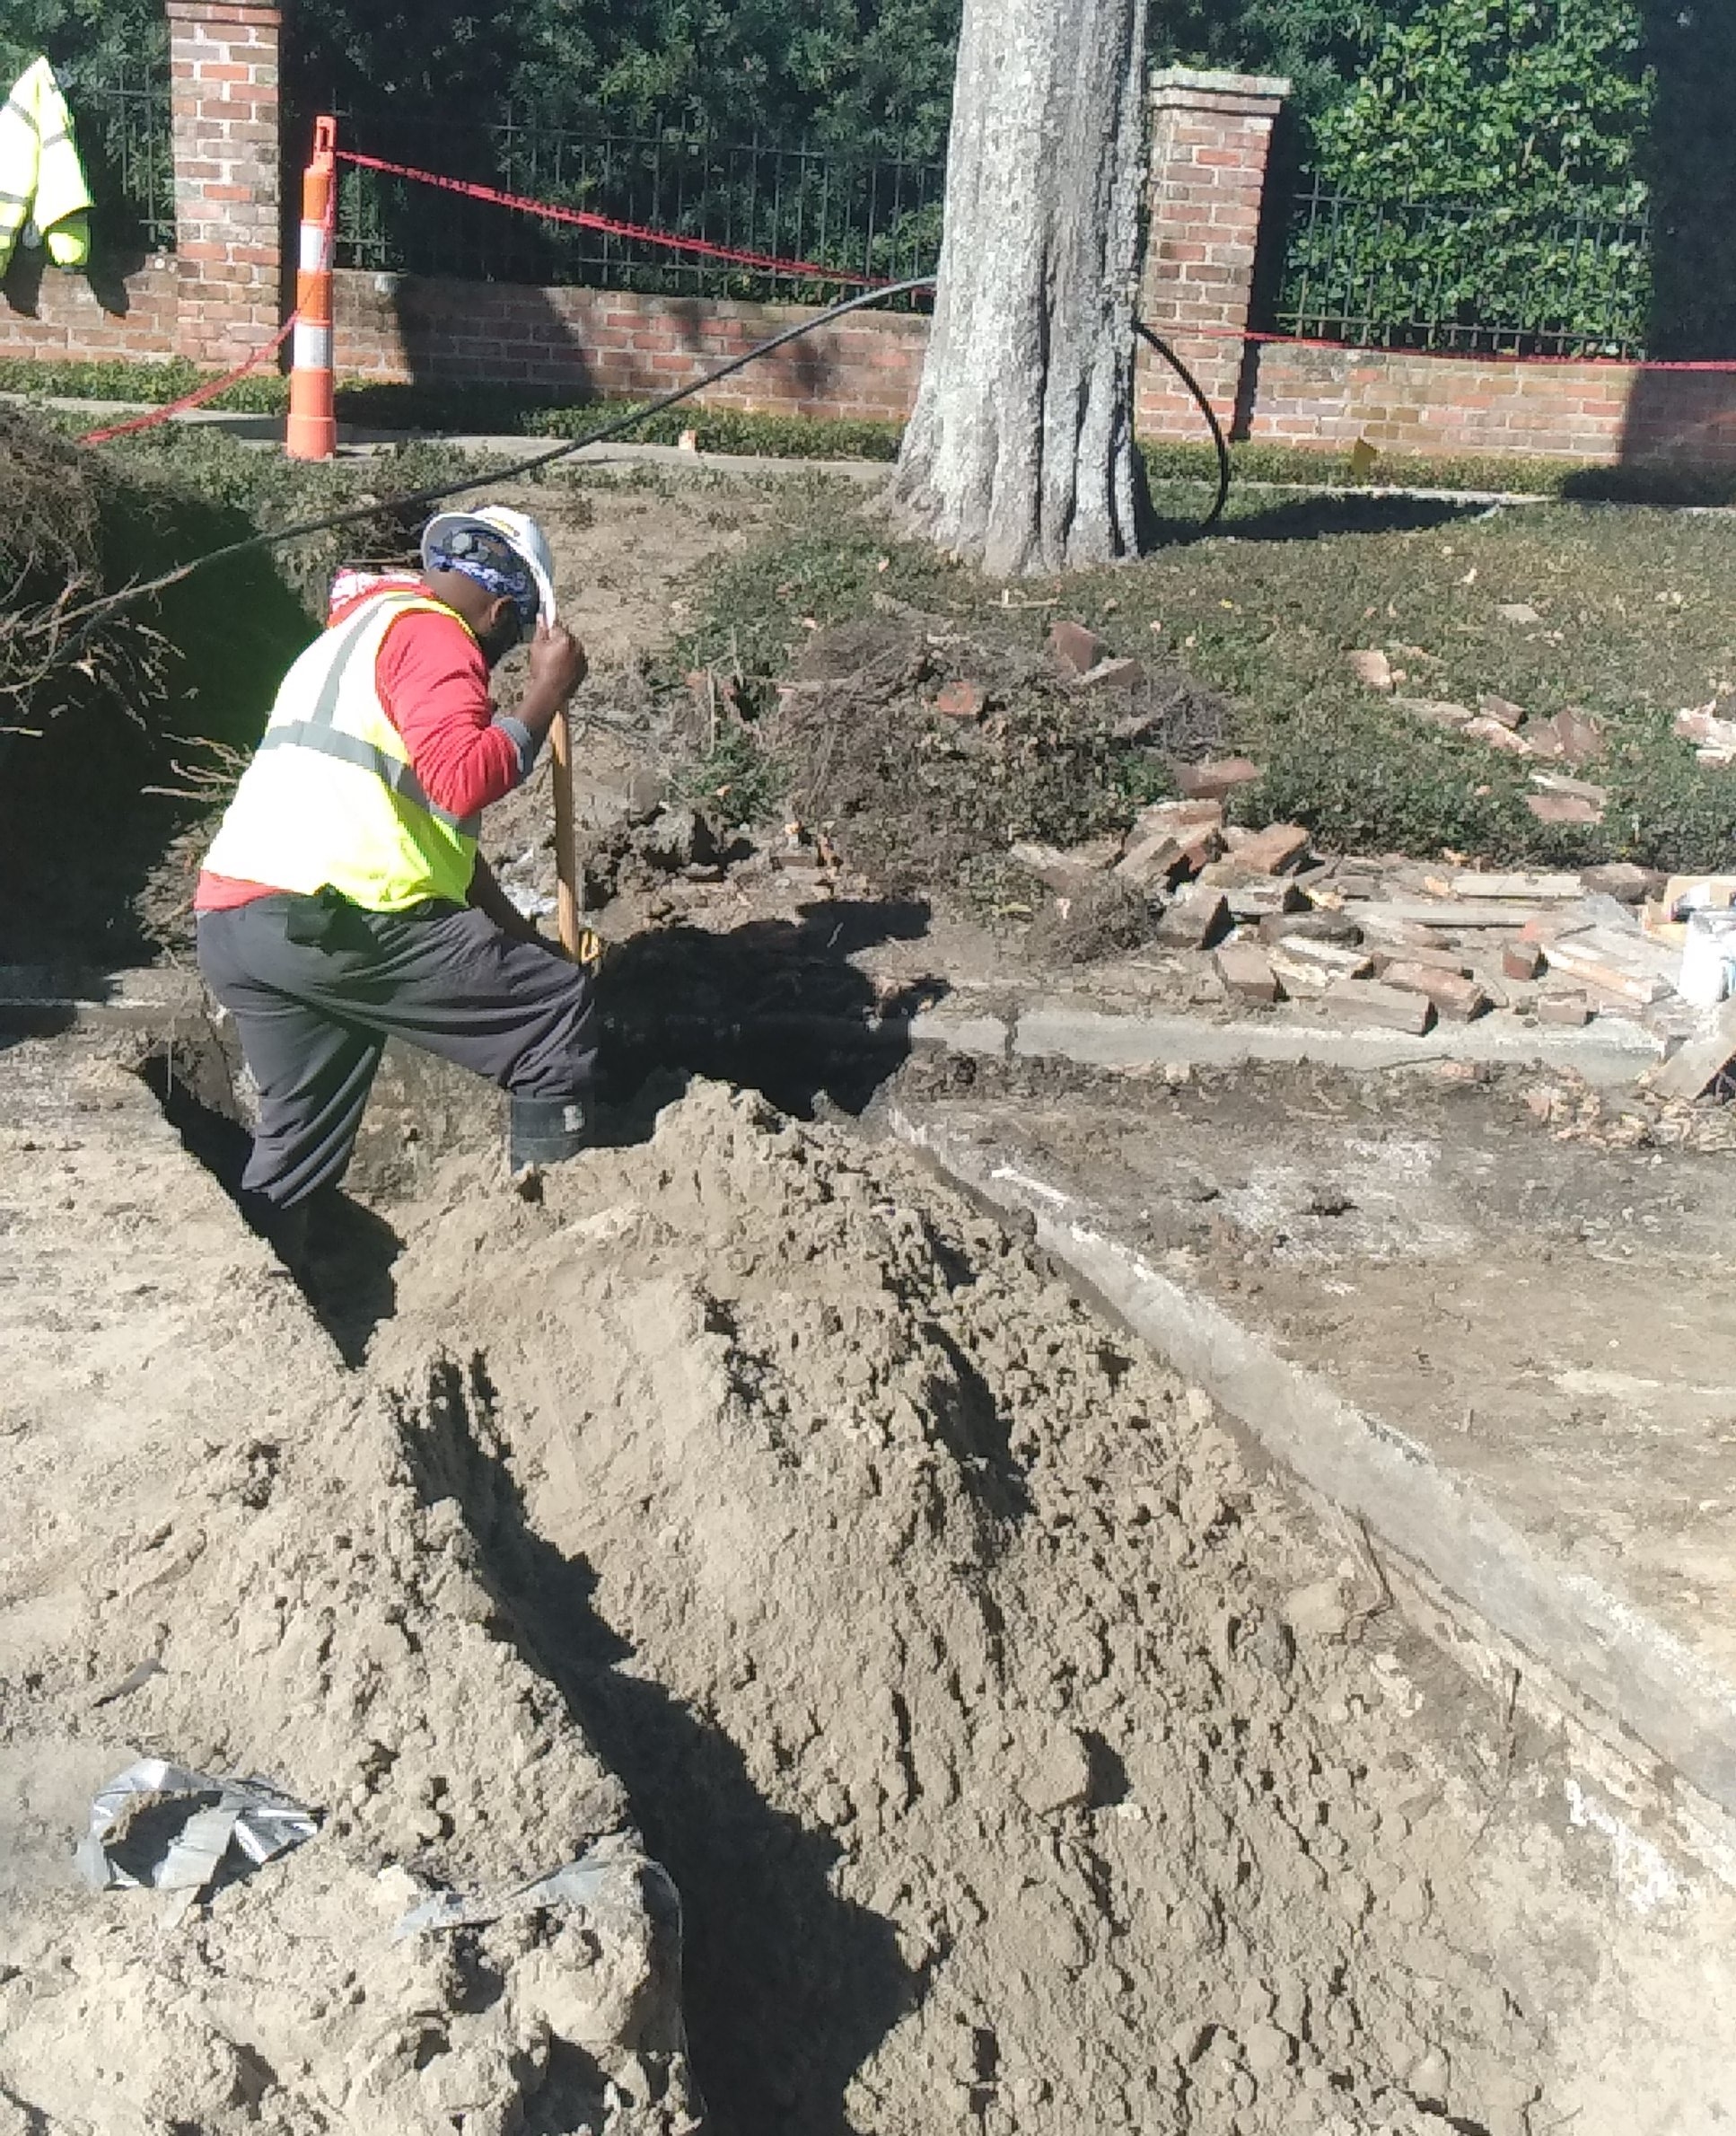 WATER LINE AND MILLING WORK CONTINUE ON AUDUBON GROUP A